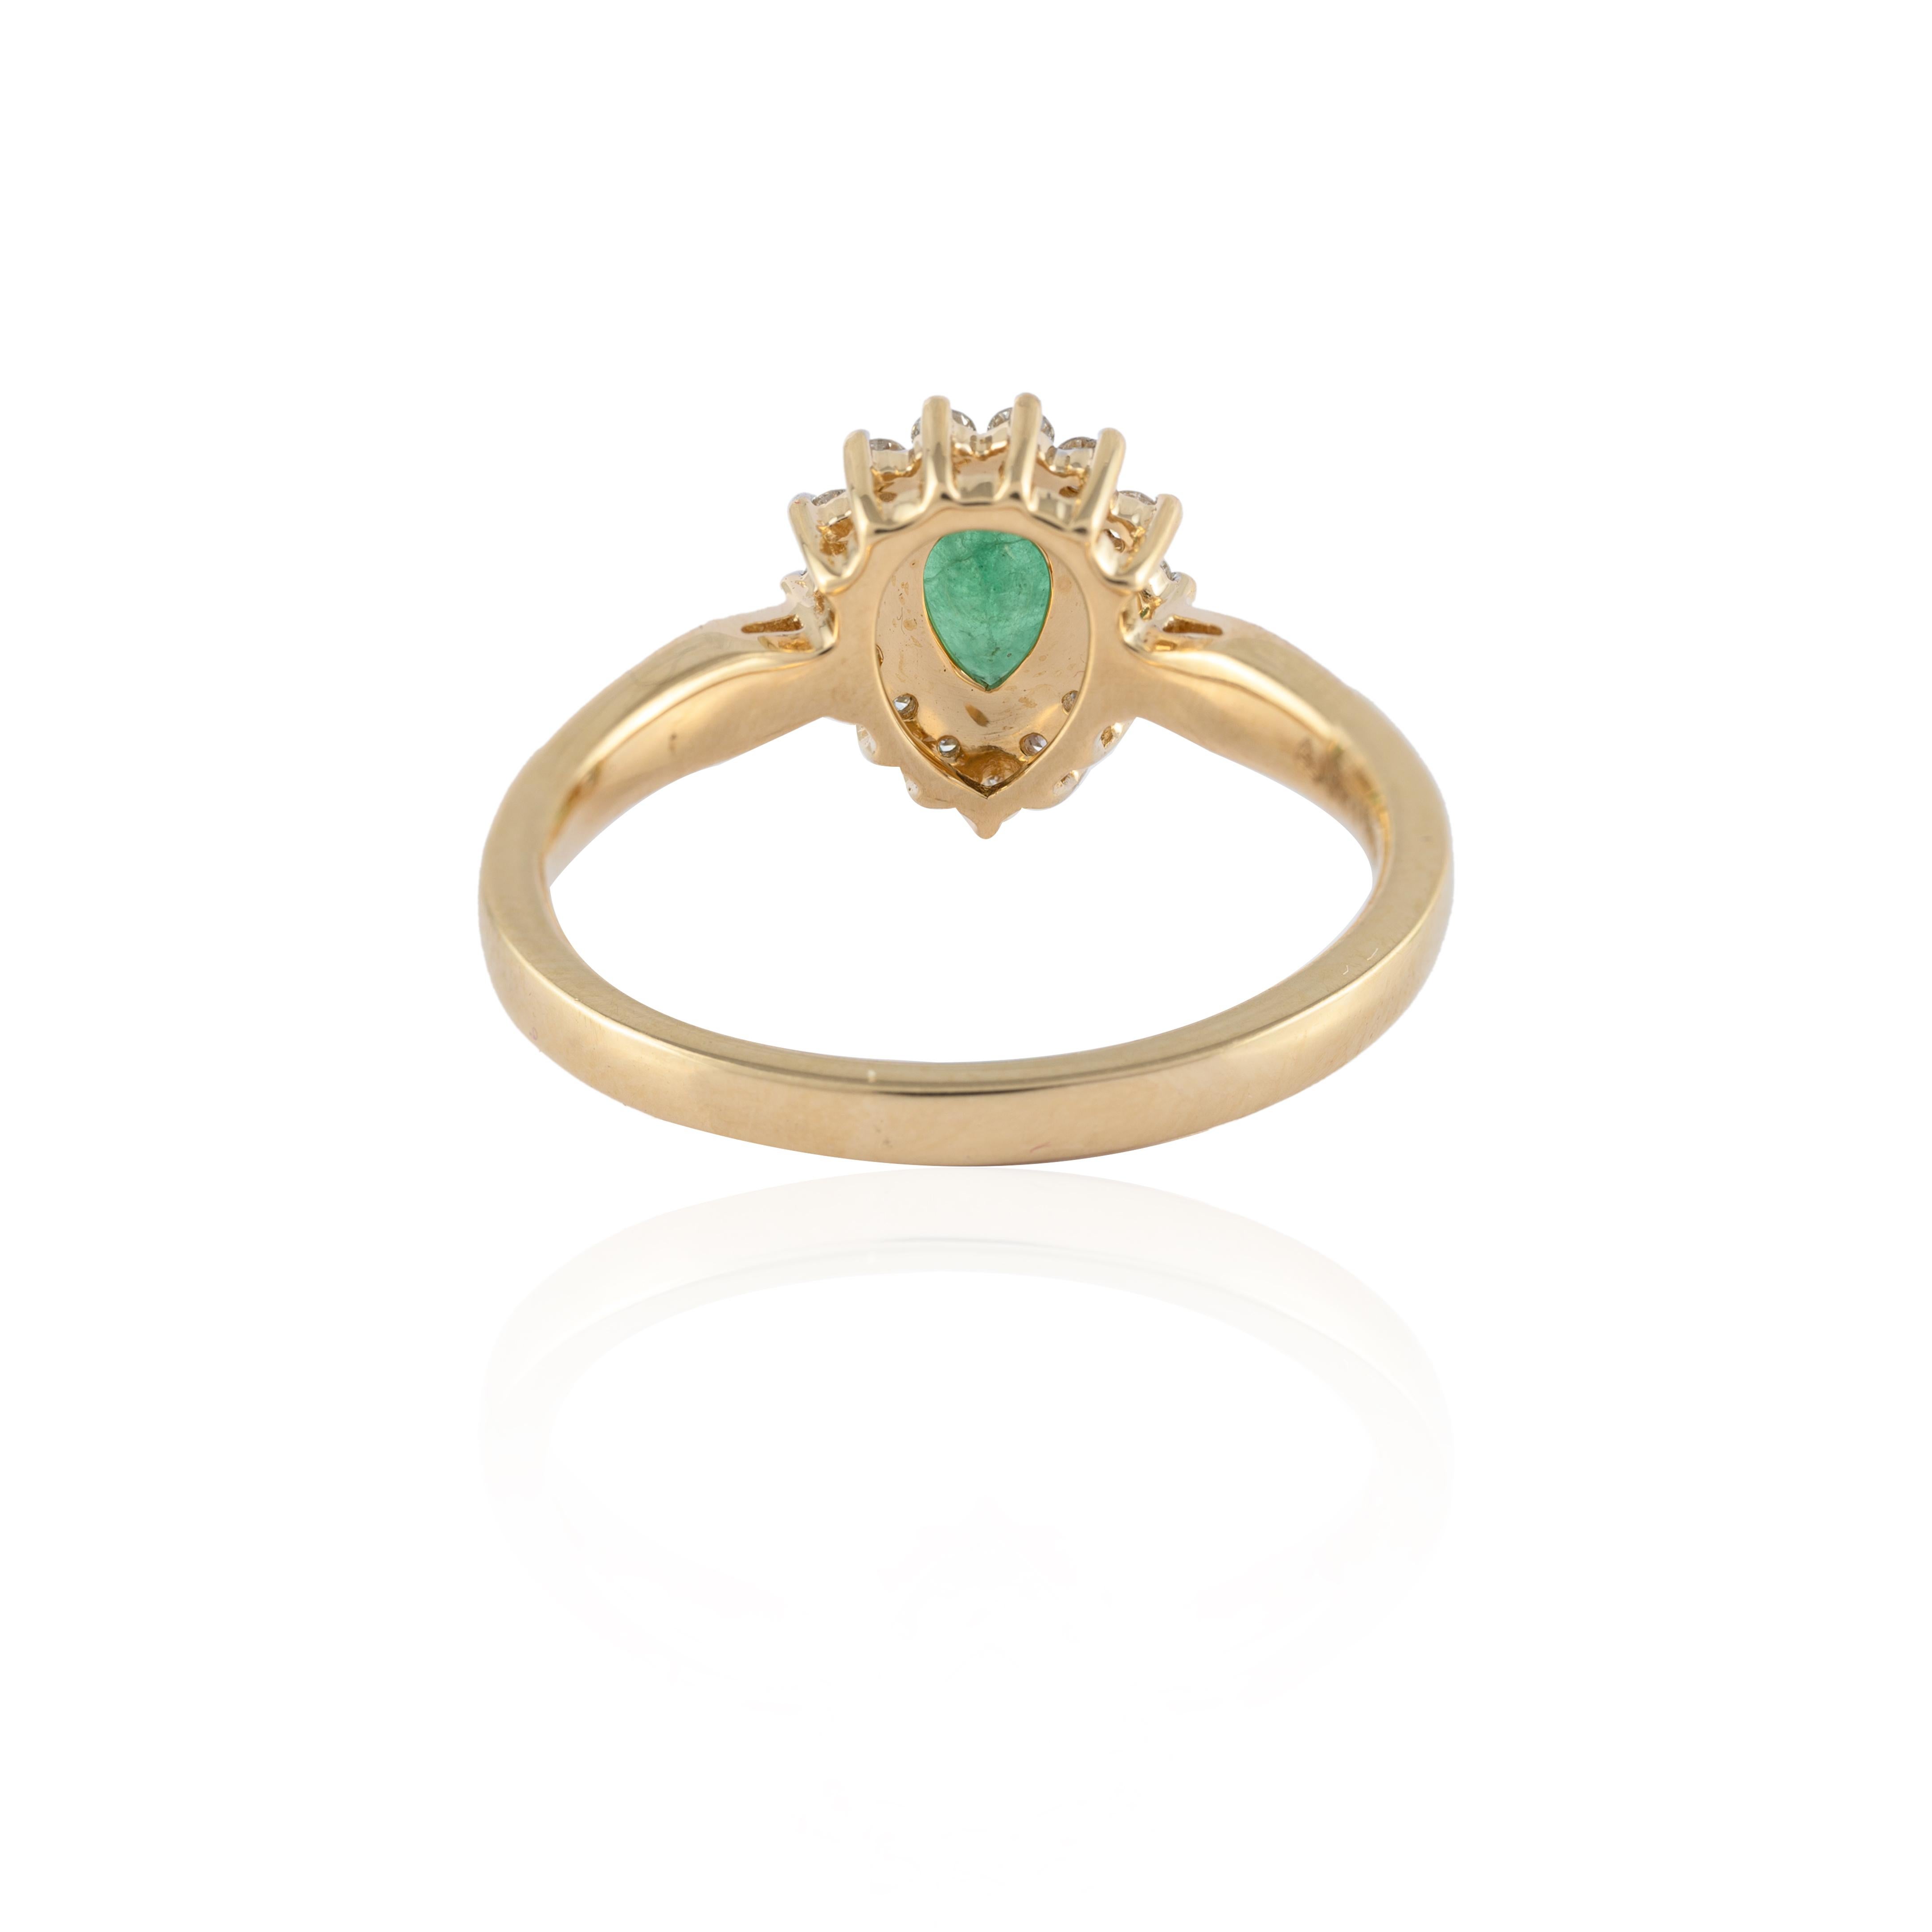 For Sale:  Pear Cut Emerald and Halo Diamond Wedding Ring Crafted in 14k Solid Yellow Gold 4